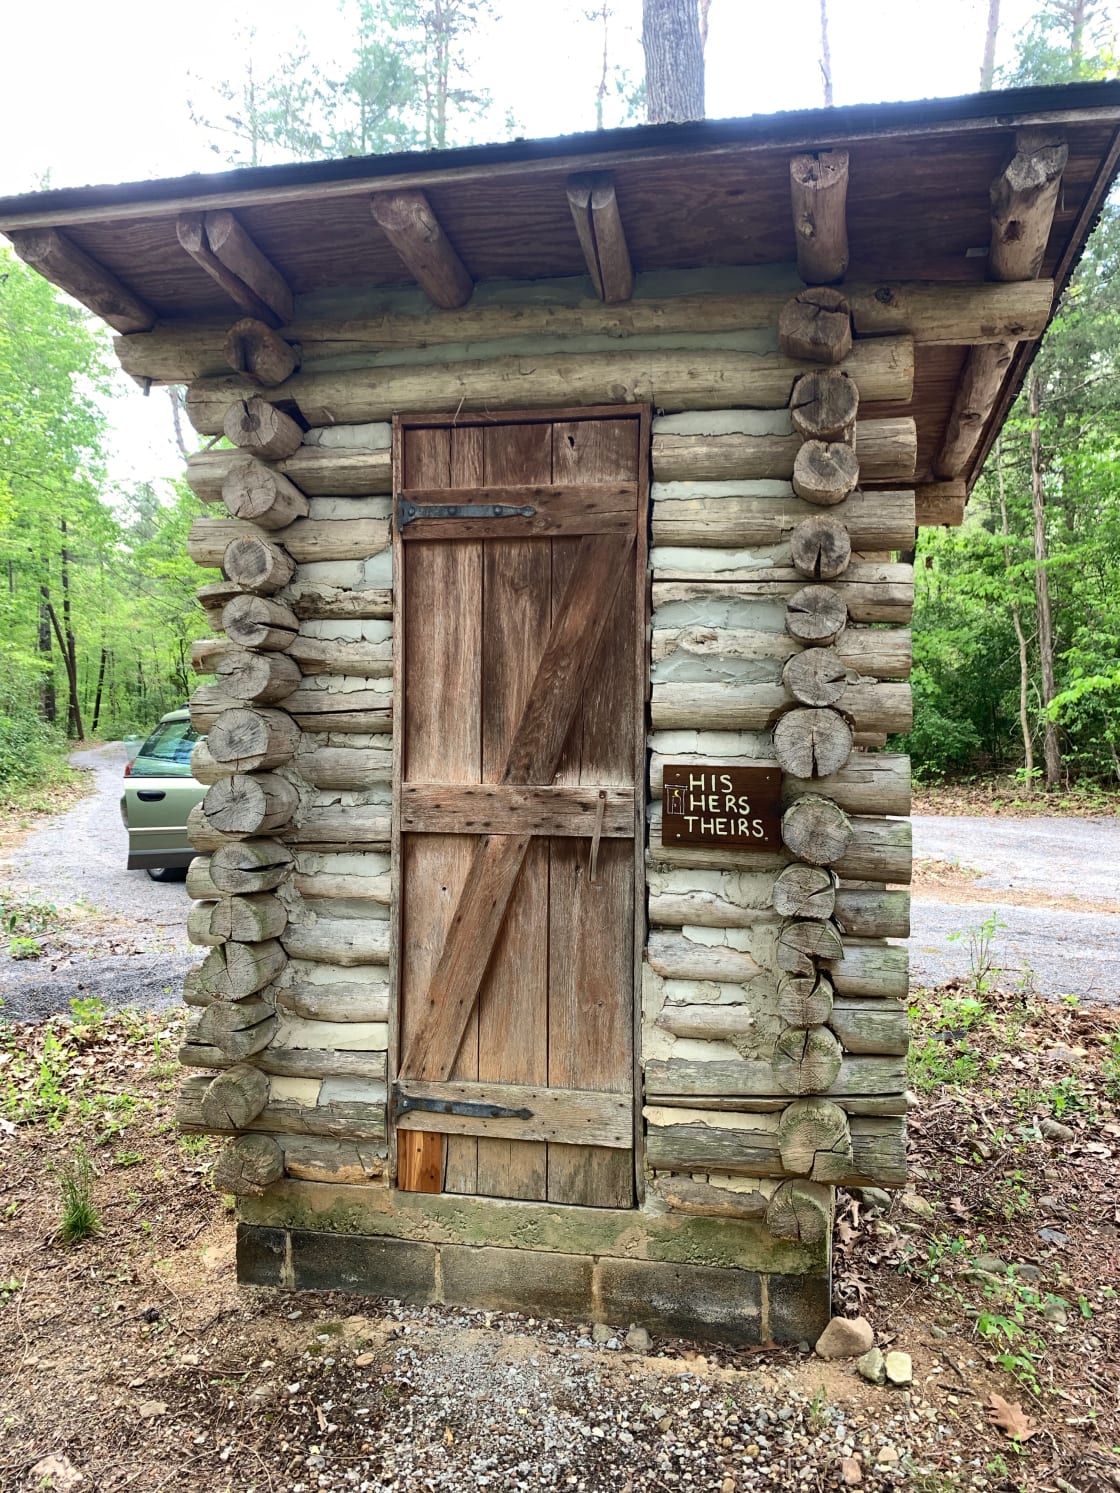 Adorable outhouse. There is also a bath house within walking distance, shared by other campers.